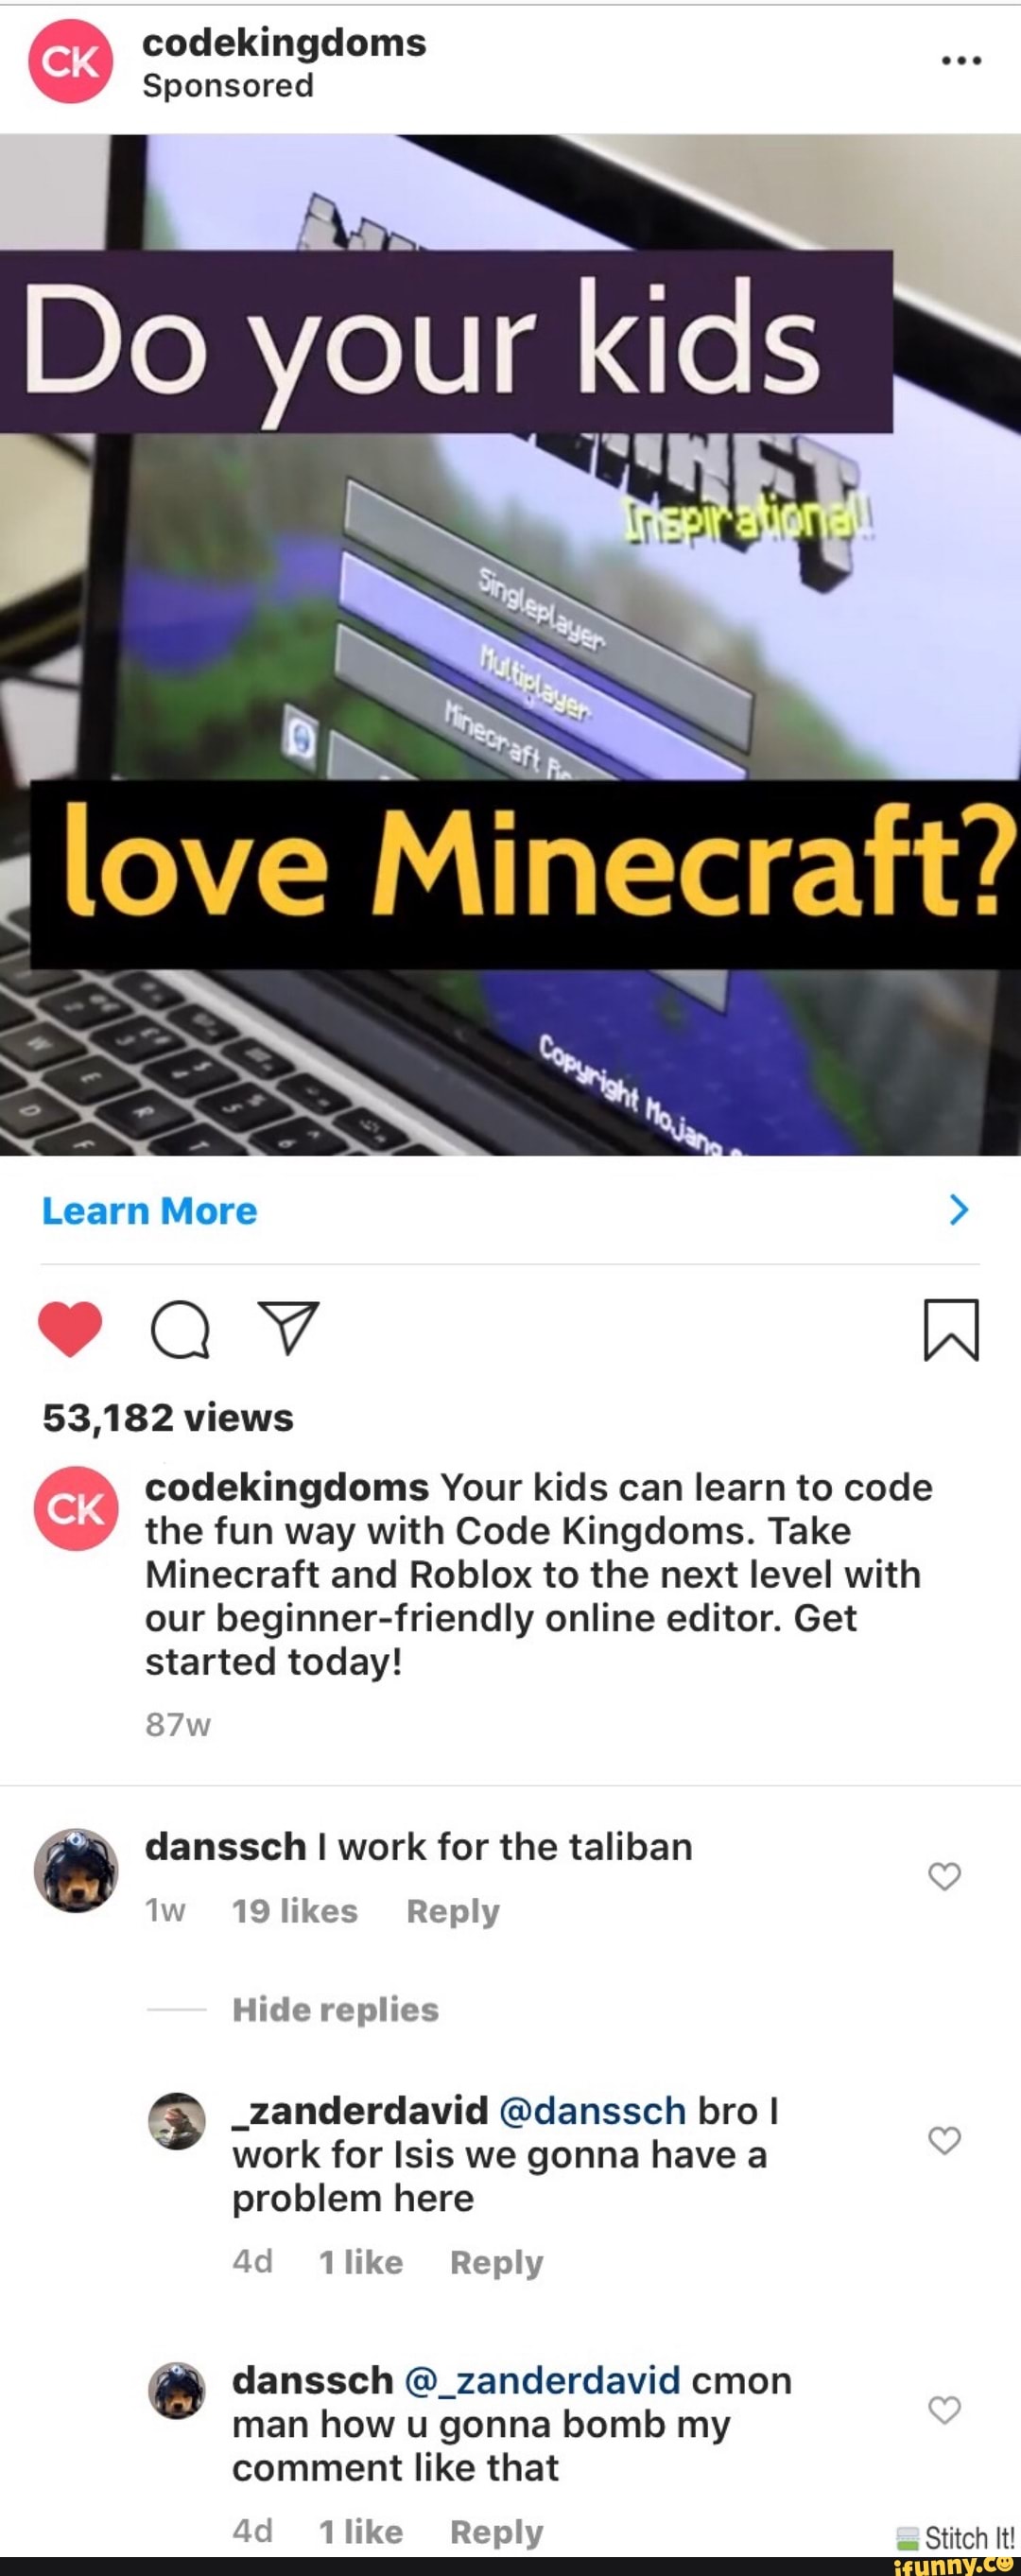 Wee Sponsored Q Codekingdoms Your Kids Can Learn To Code The Fun Way With Code Kingdoms Take Minecraft And Roblox To The Next Level With Our Beginner Friendly Online Editor Get Started Today - roblox the next level